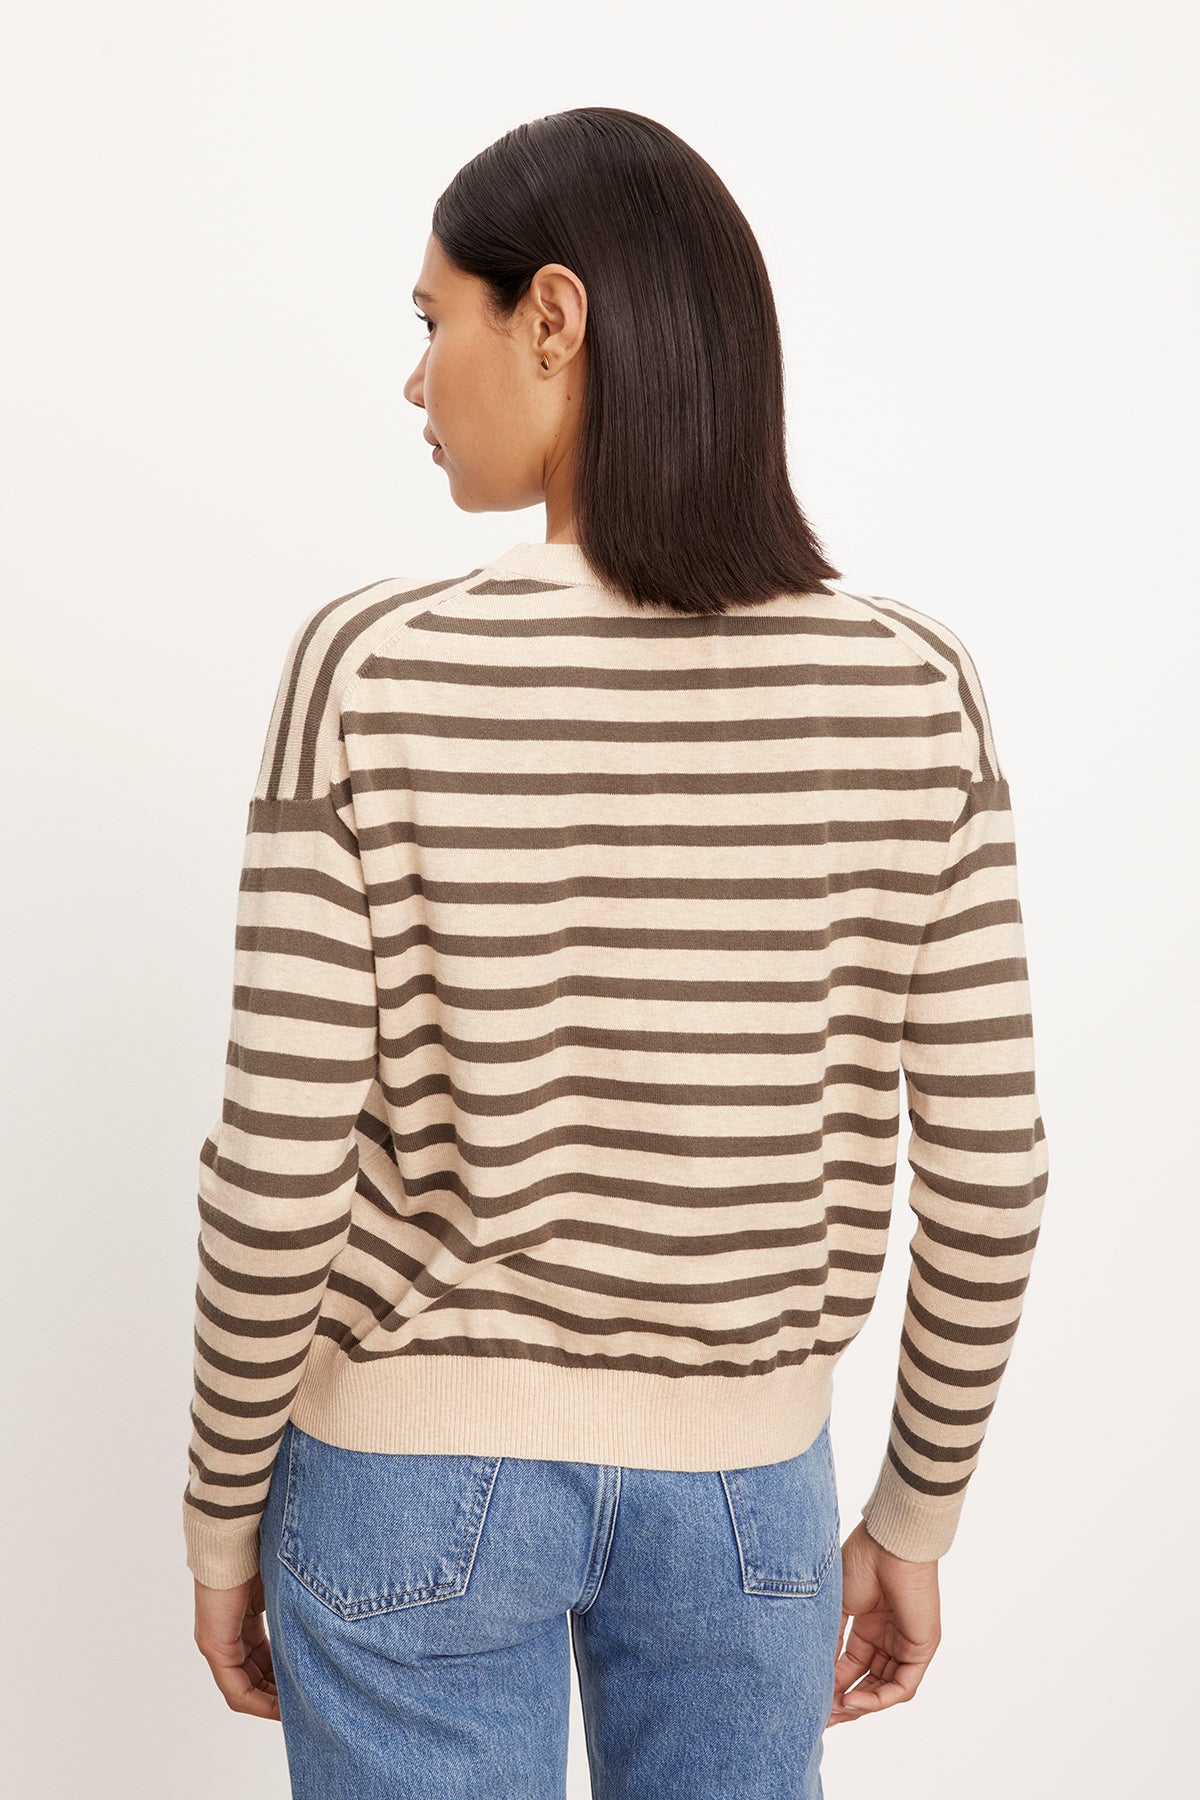   The back view of a woman wearing the Velvet by Graham & Spencer ALISTER STRIPED CREW NECK SWEATER and jeans. 